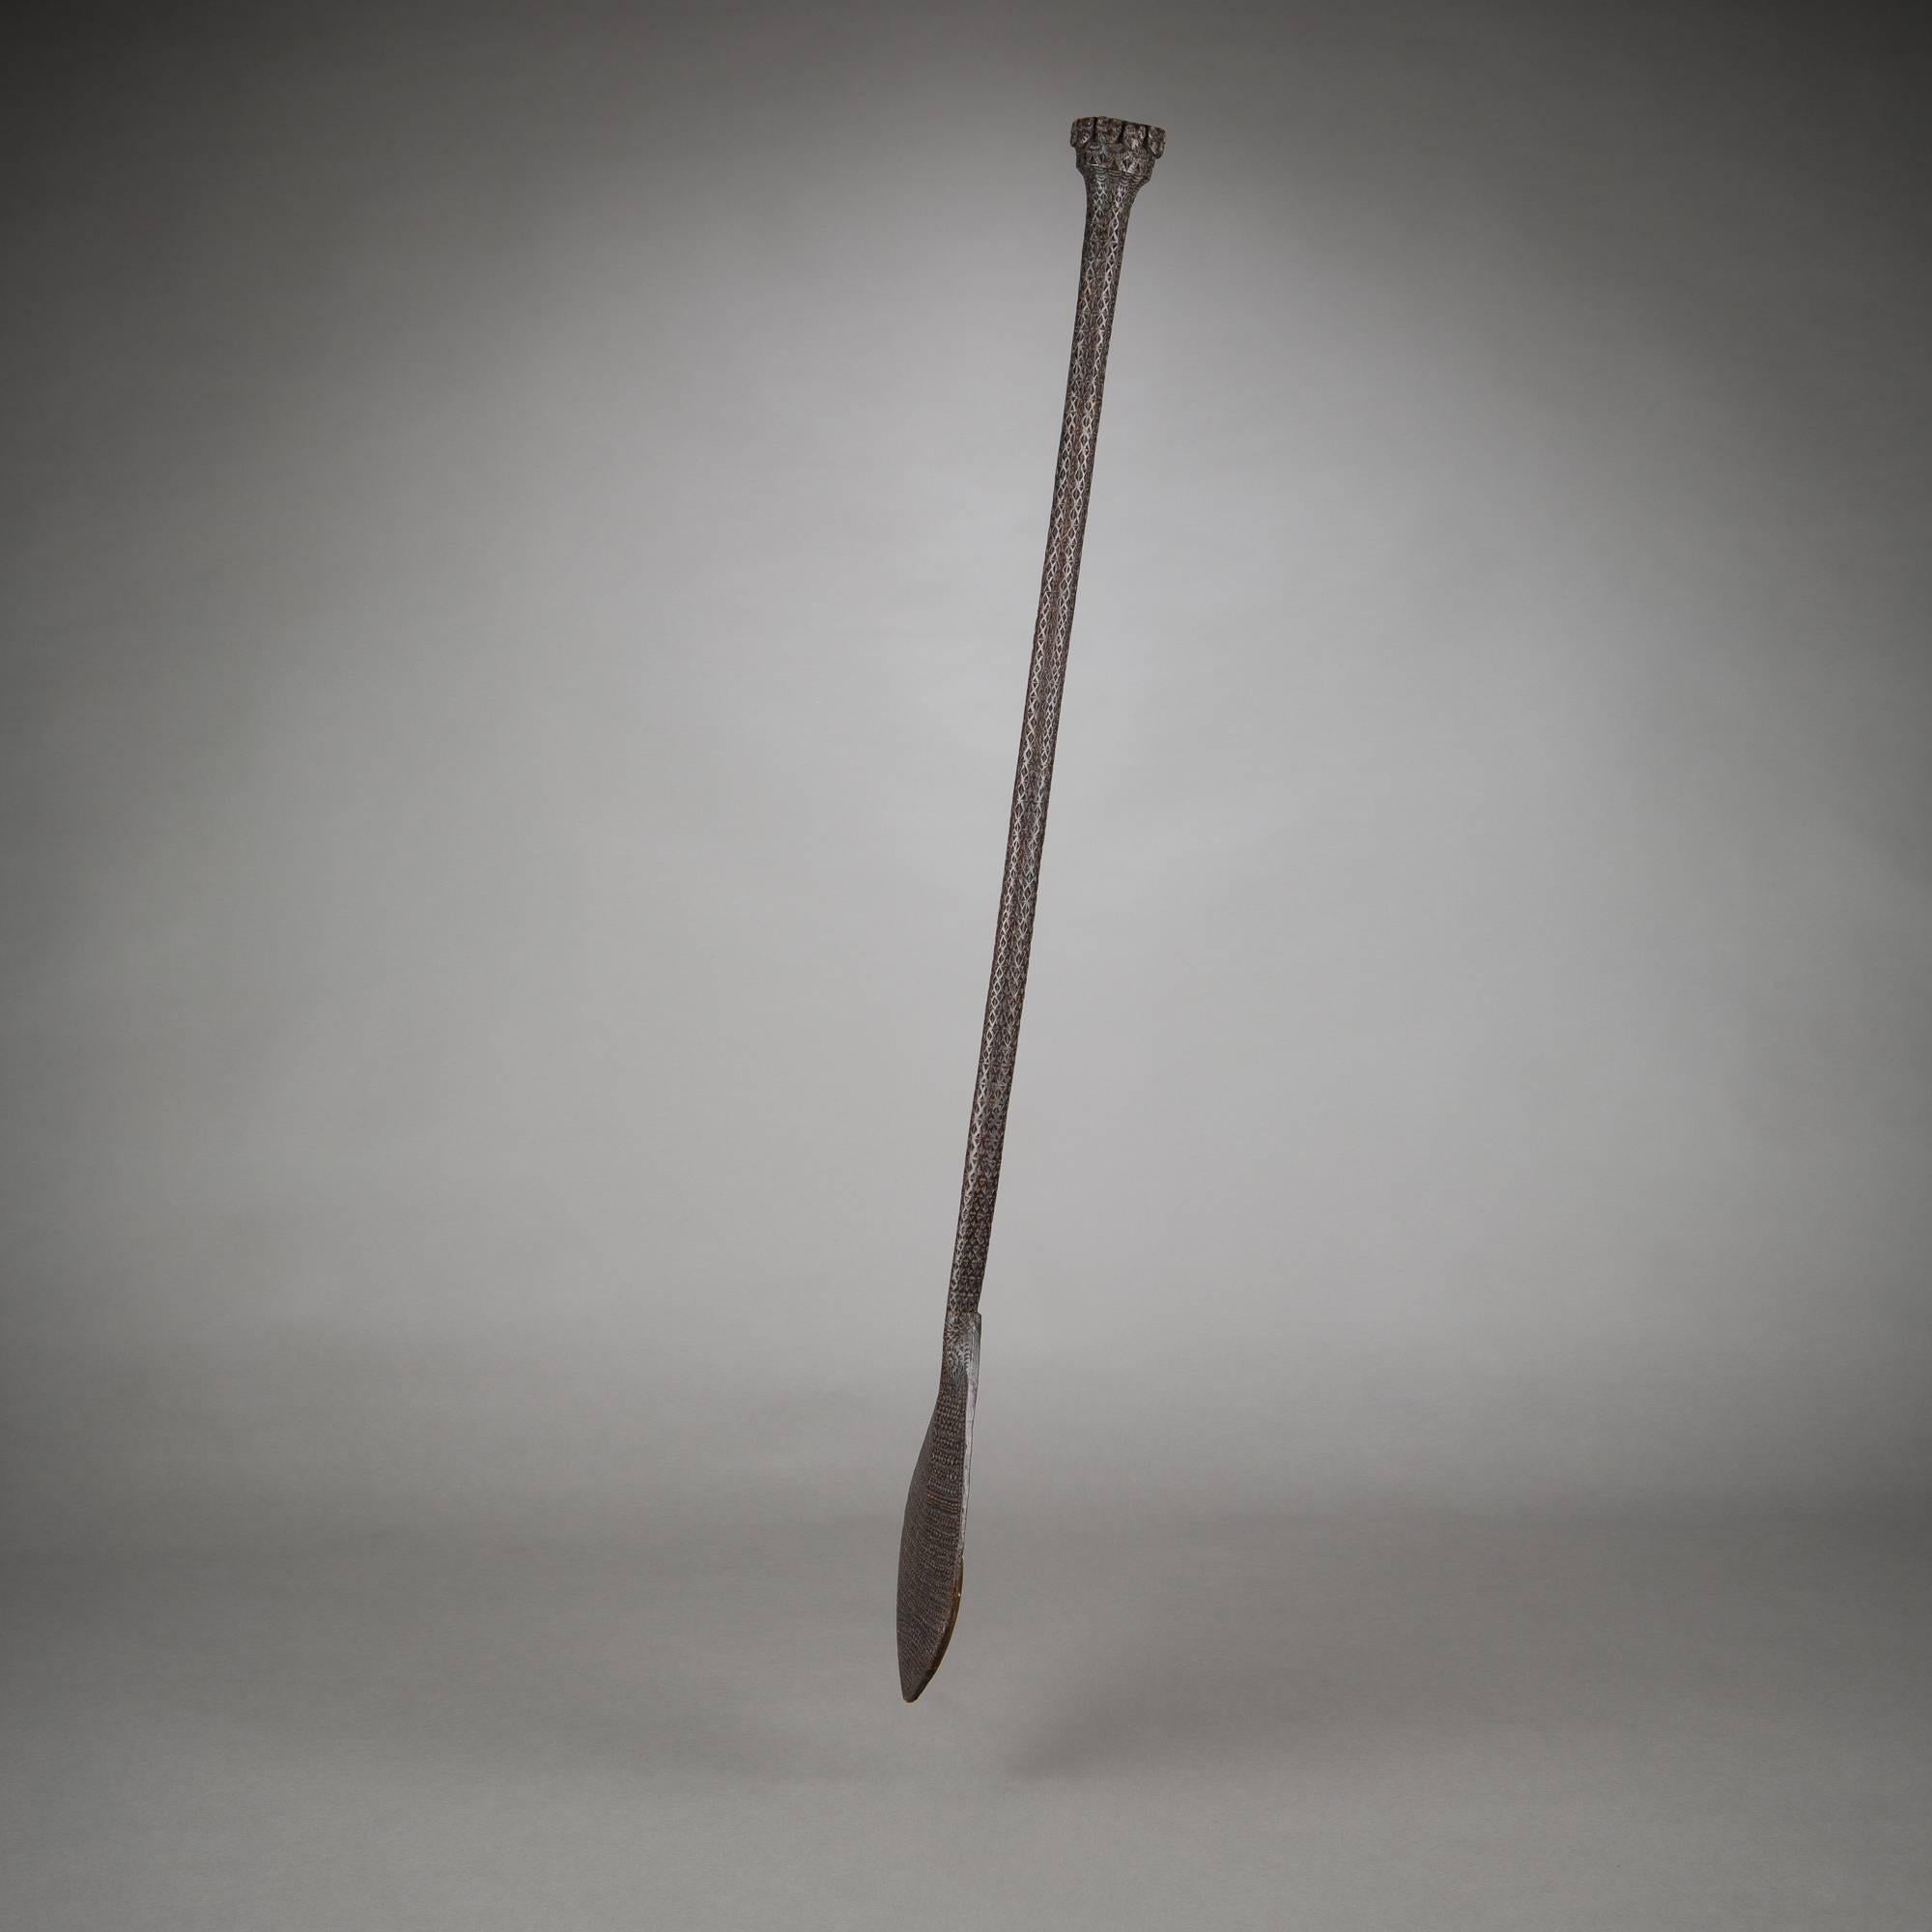 A classic Austral Islands paddle featuring the intricate surface carving for which these objects are renowned. Ceremonial paddles are icons of Austral Islands art, and although their original purpose is not clear, they were likely used as dance